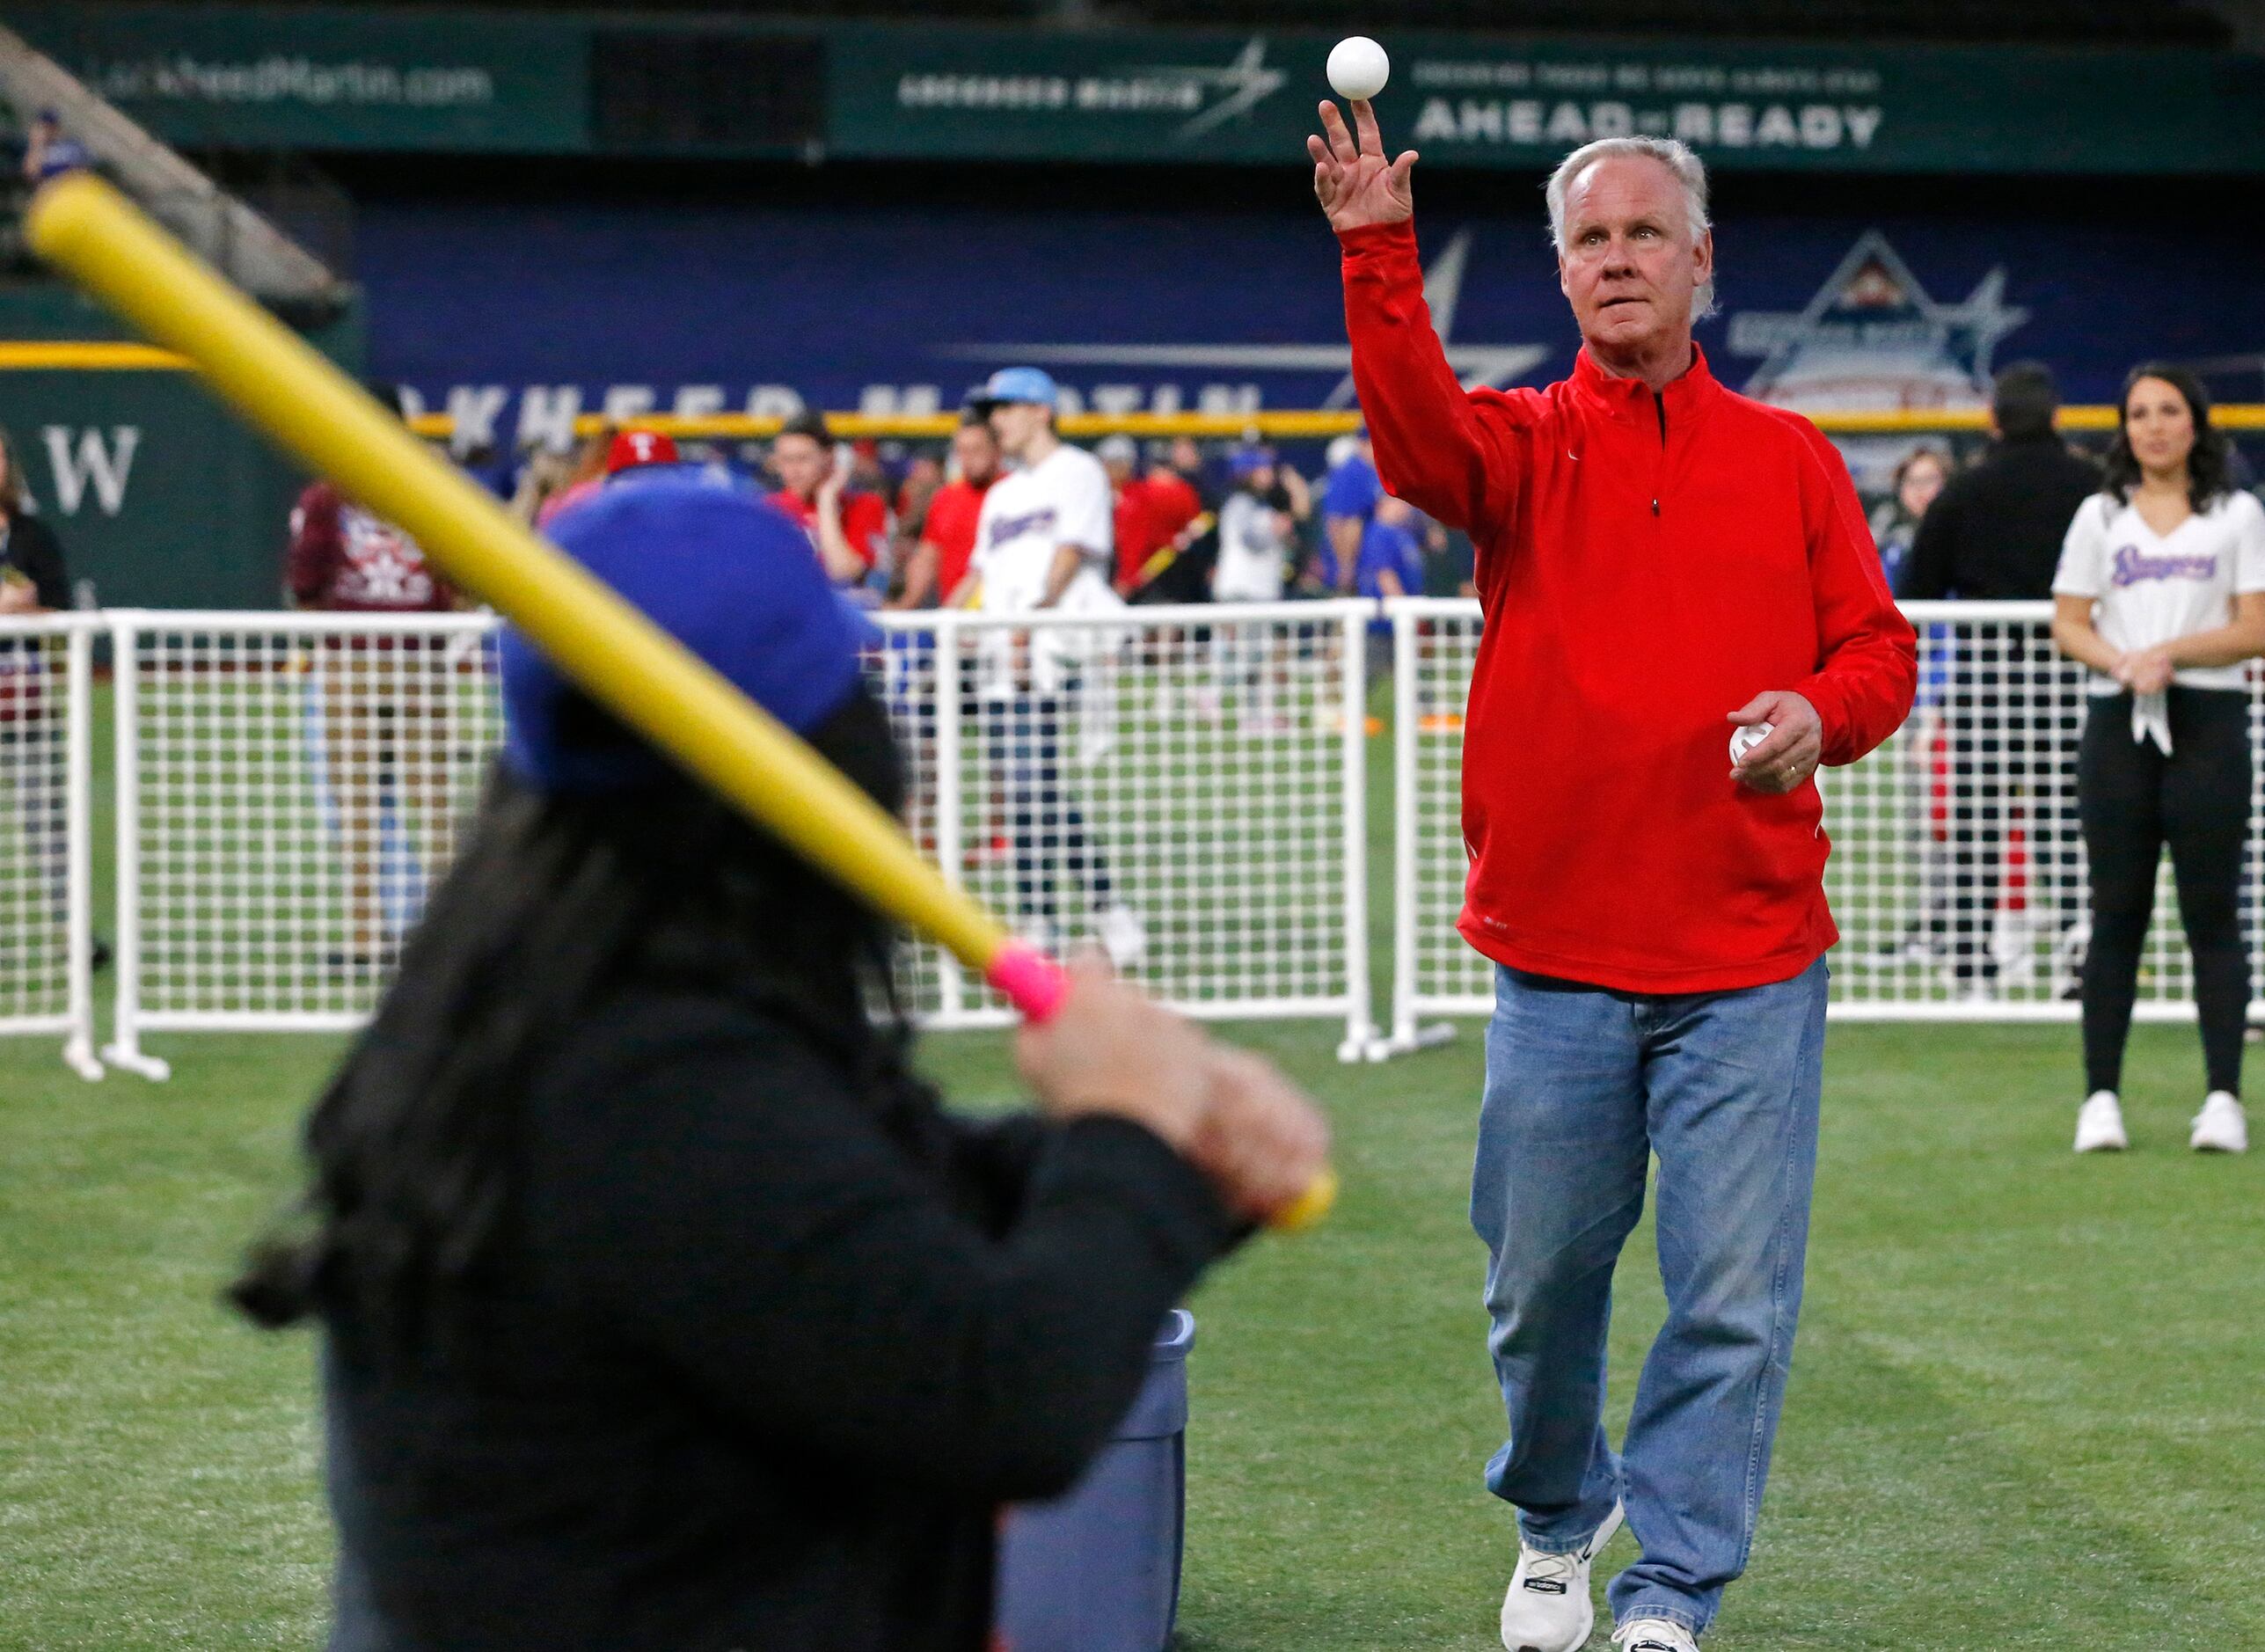 Former Texas Rangers third baseman Steve Buechele was on hand to pitche wiffle balls to fans...